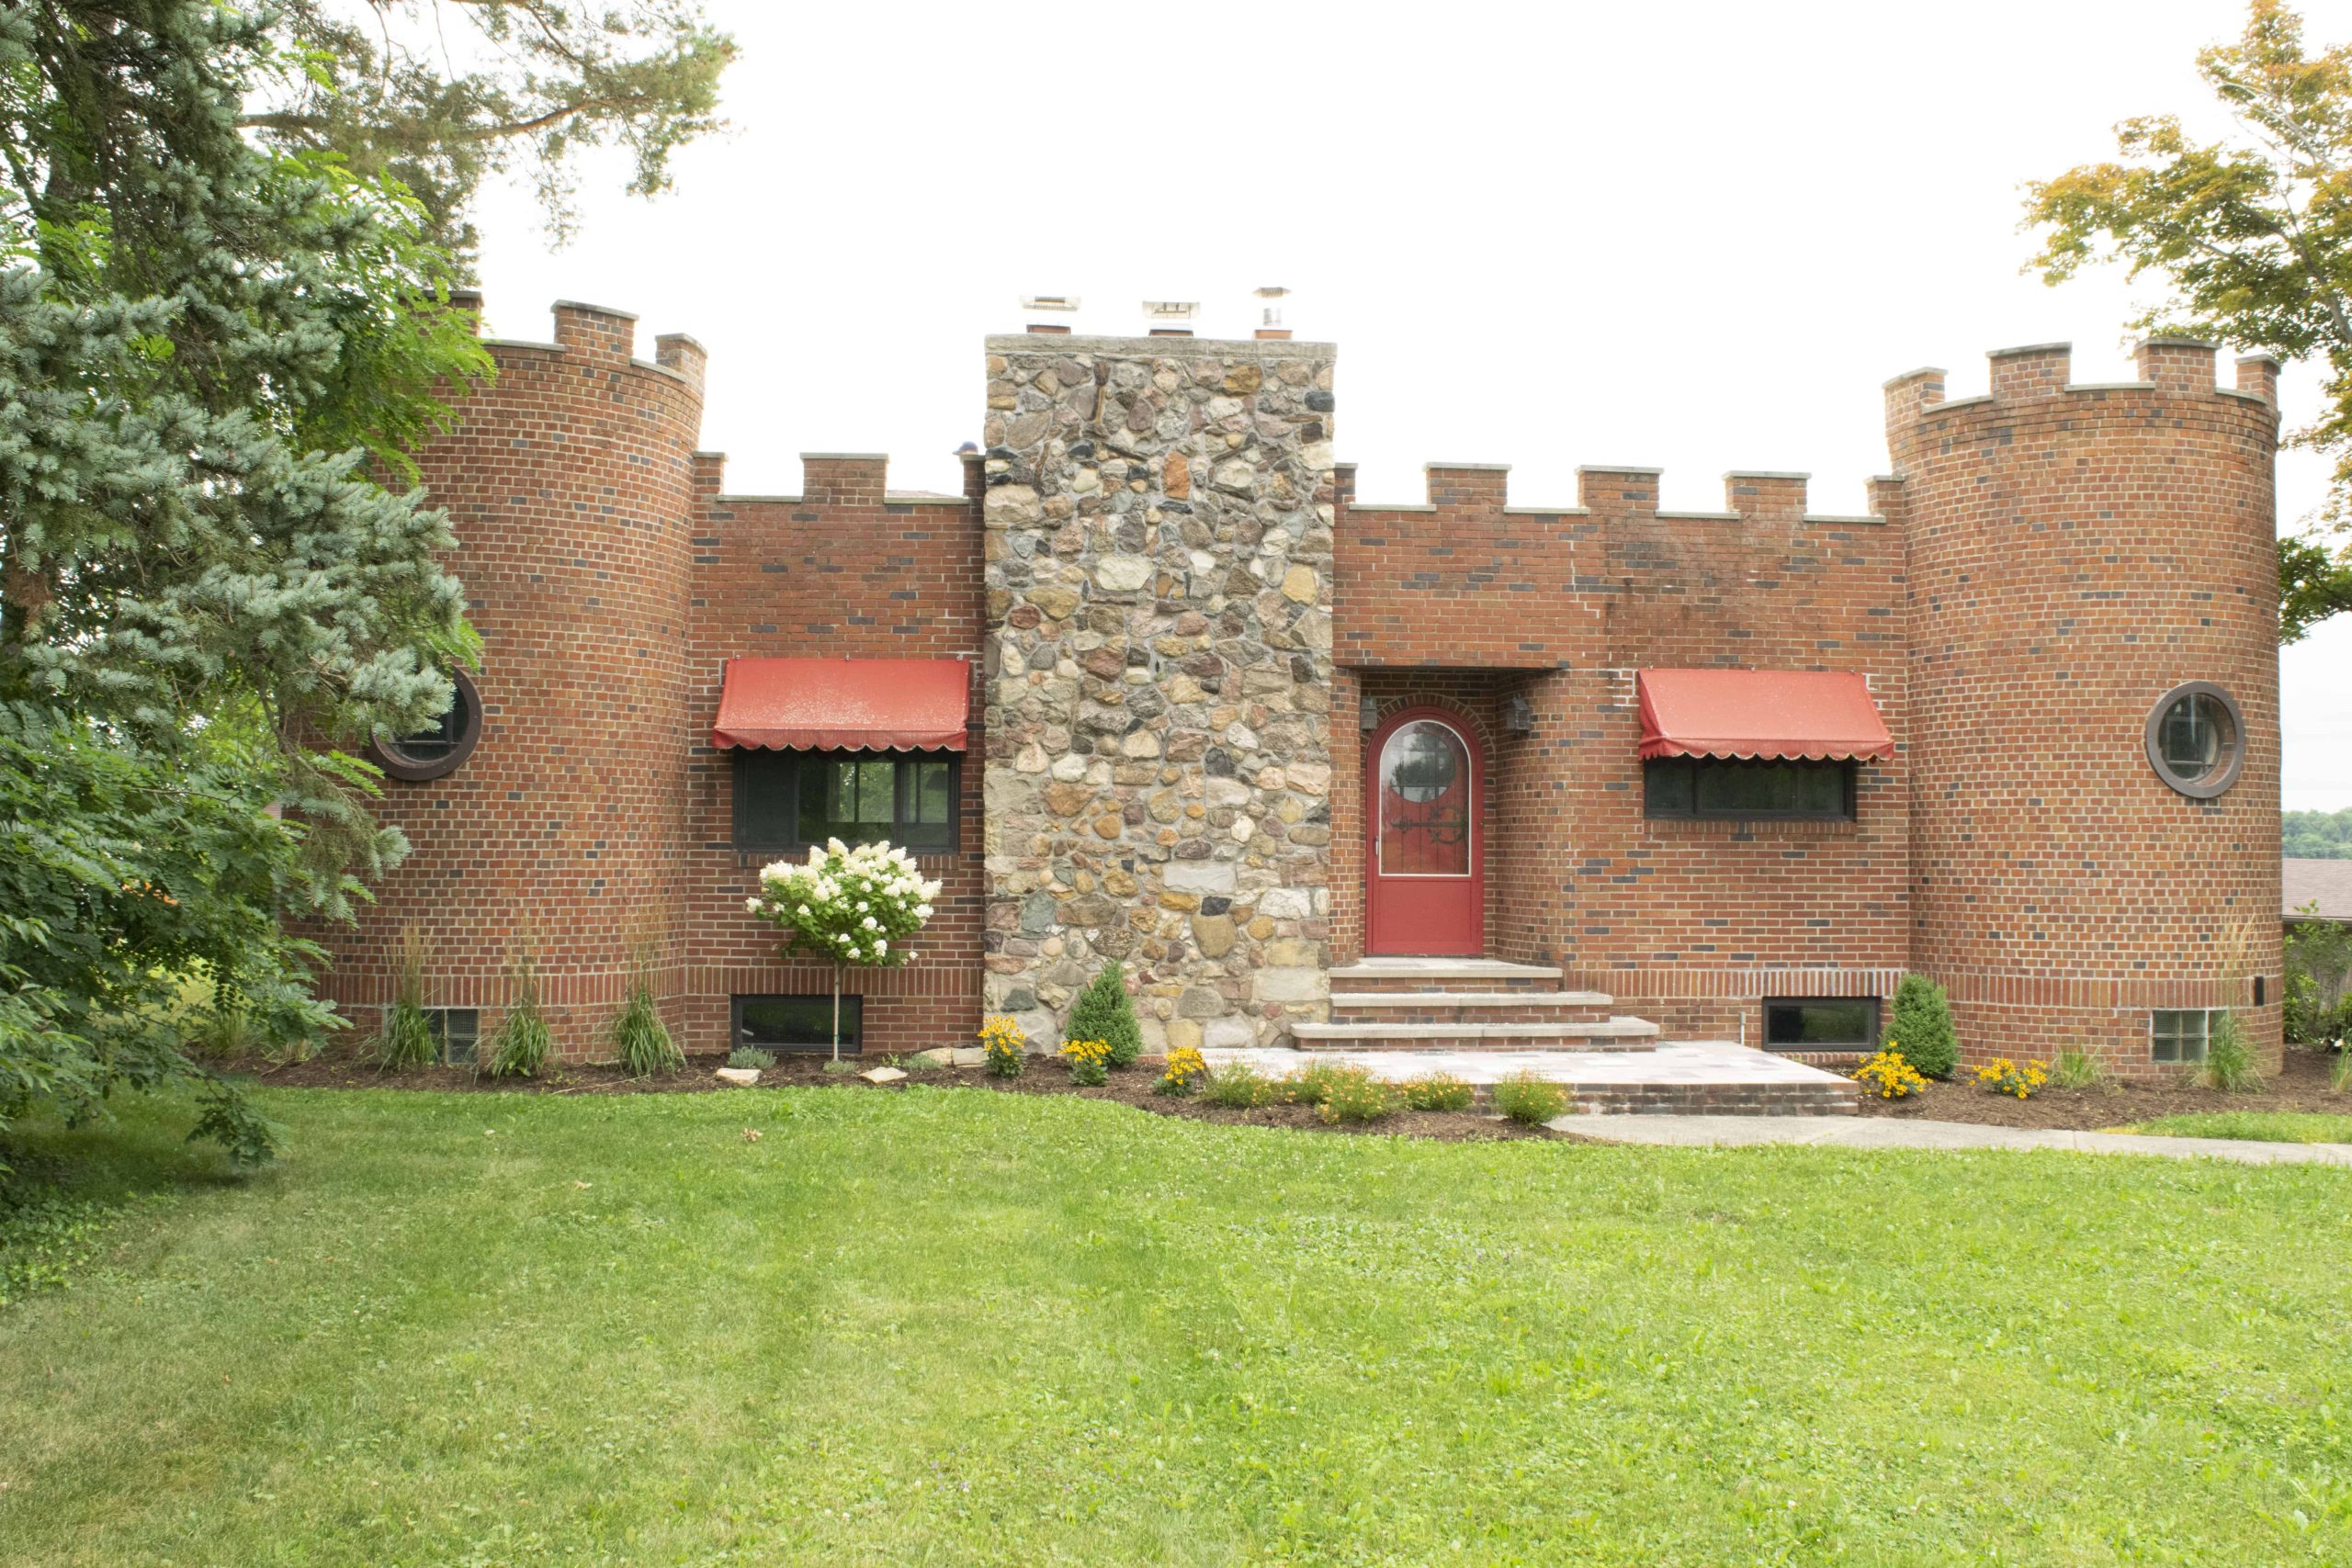 GRAND MEDINA HOME: Protecting the Castle